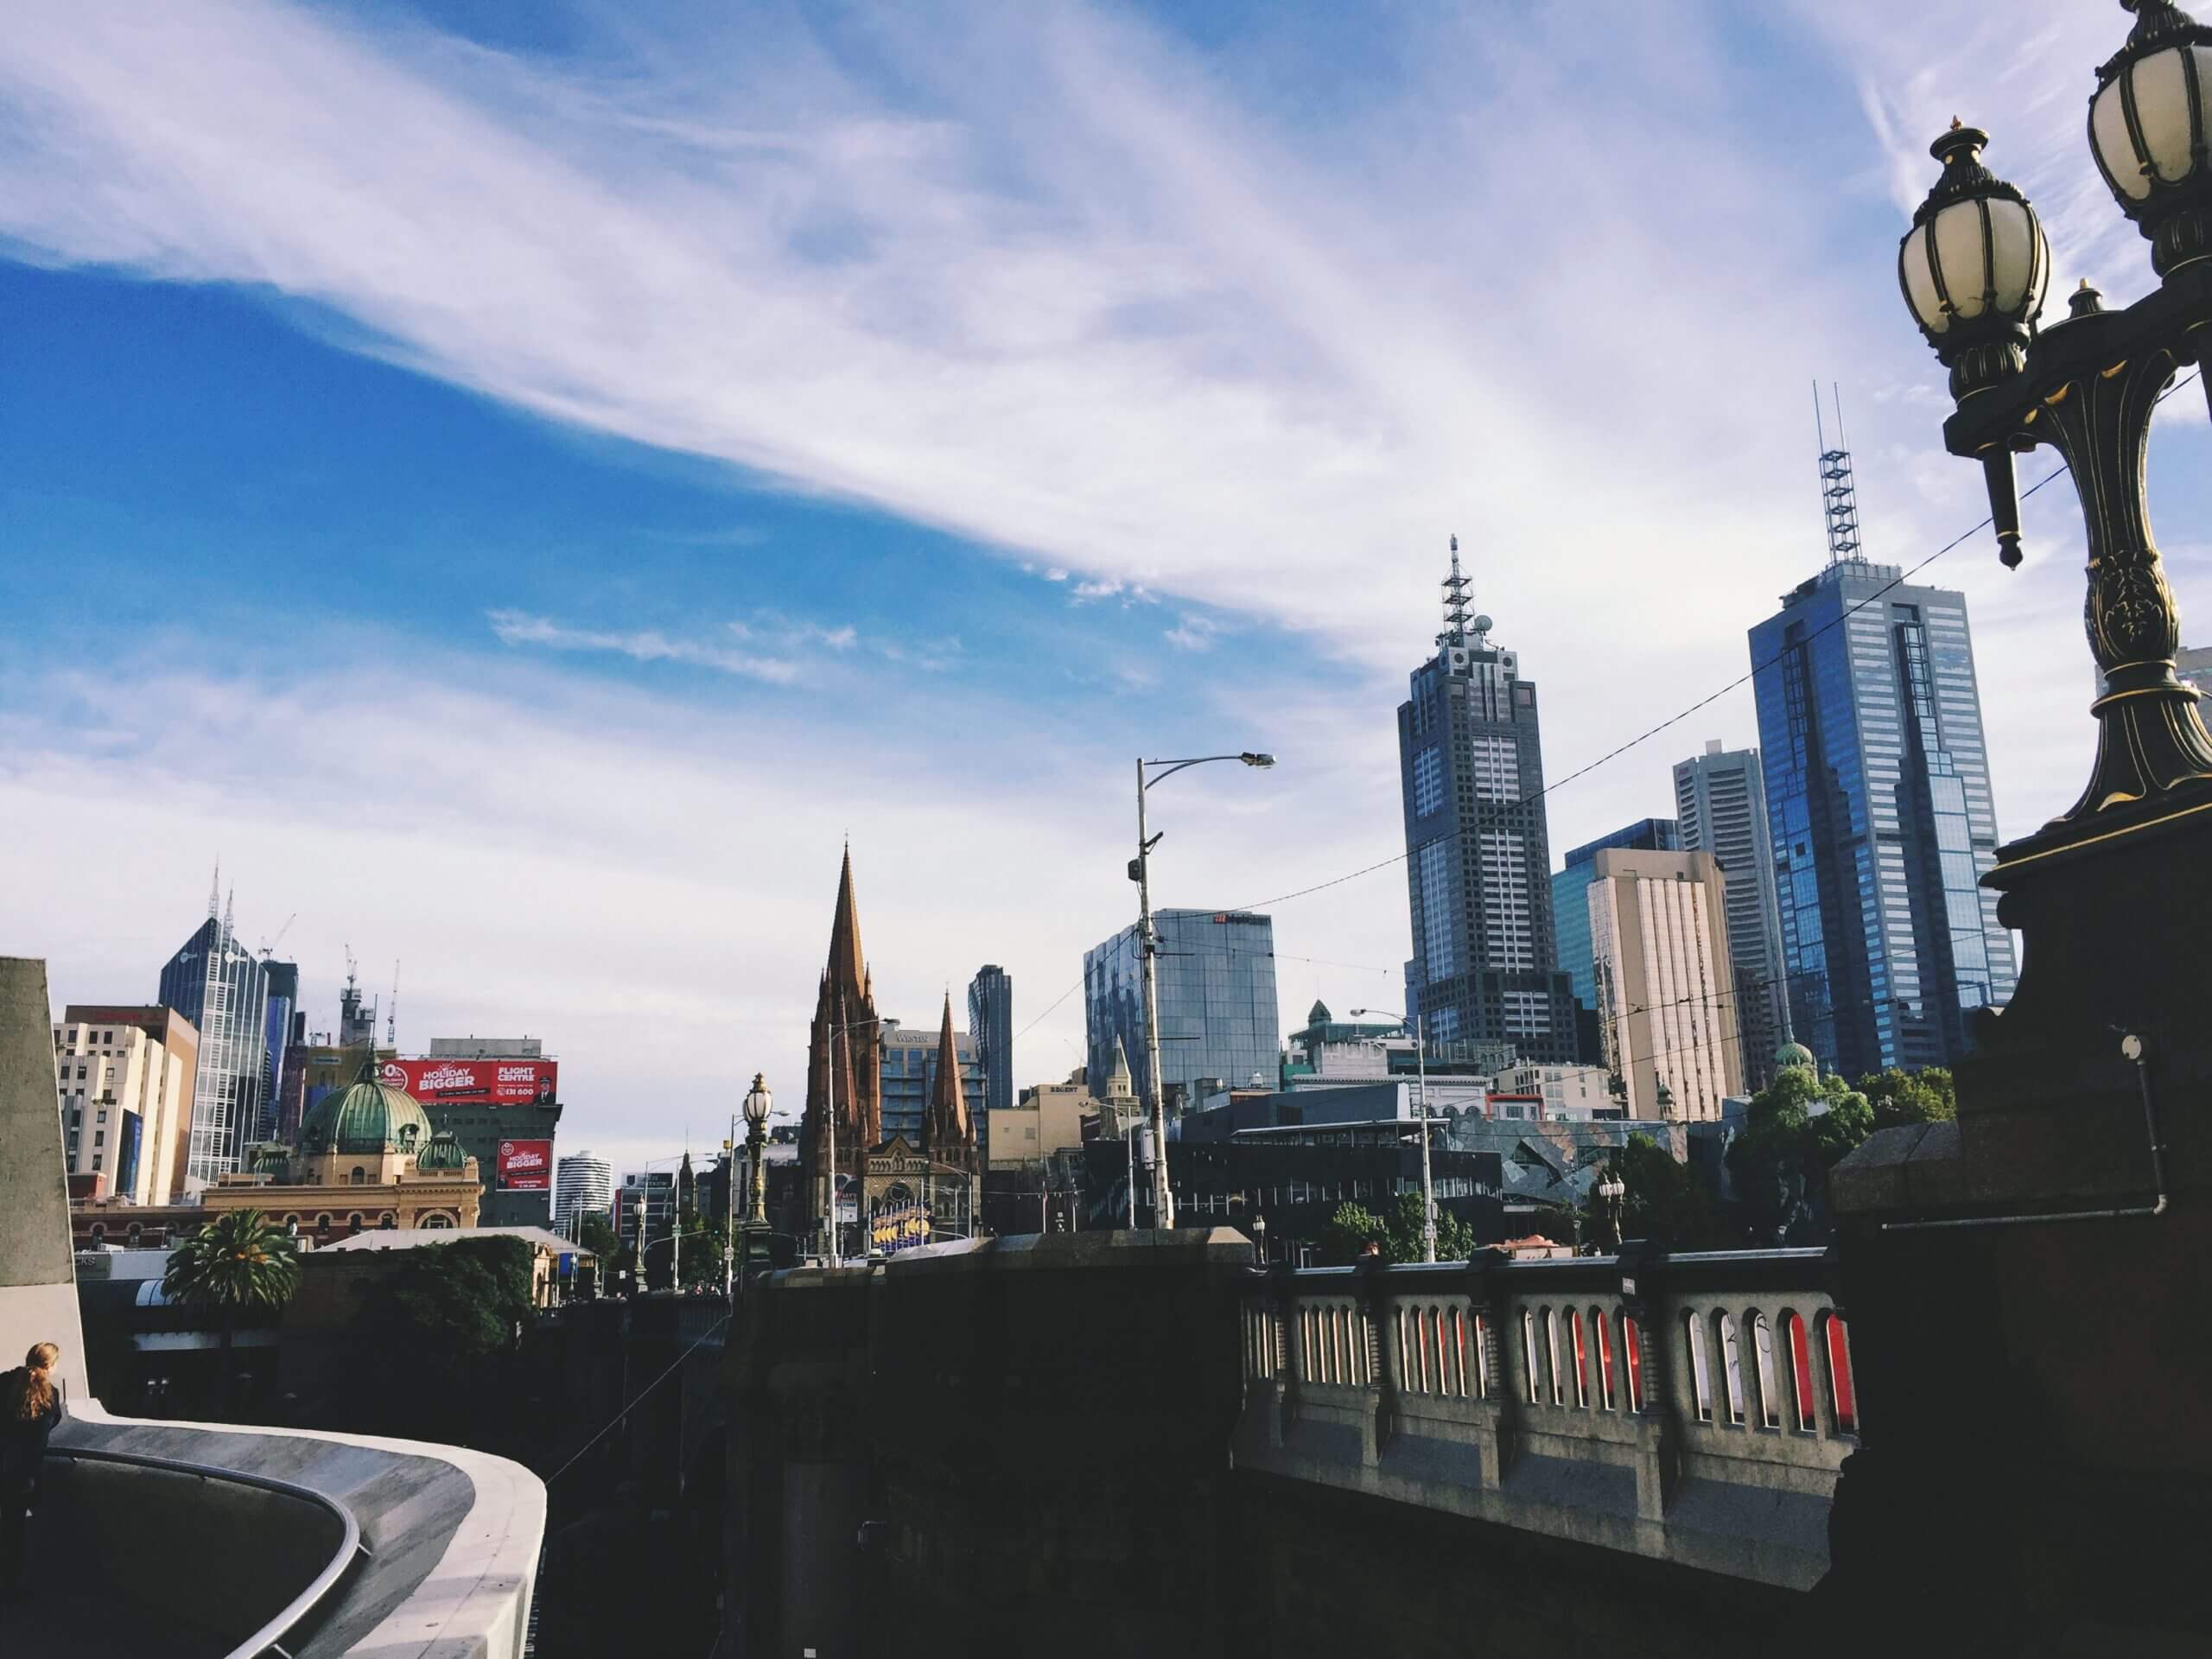 Looking for a Digital Agency in Melbourne?